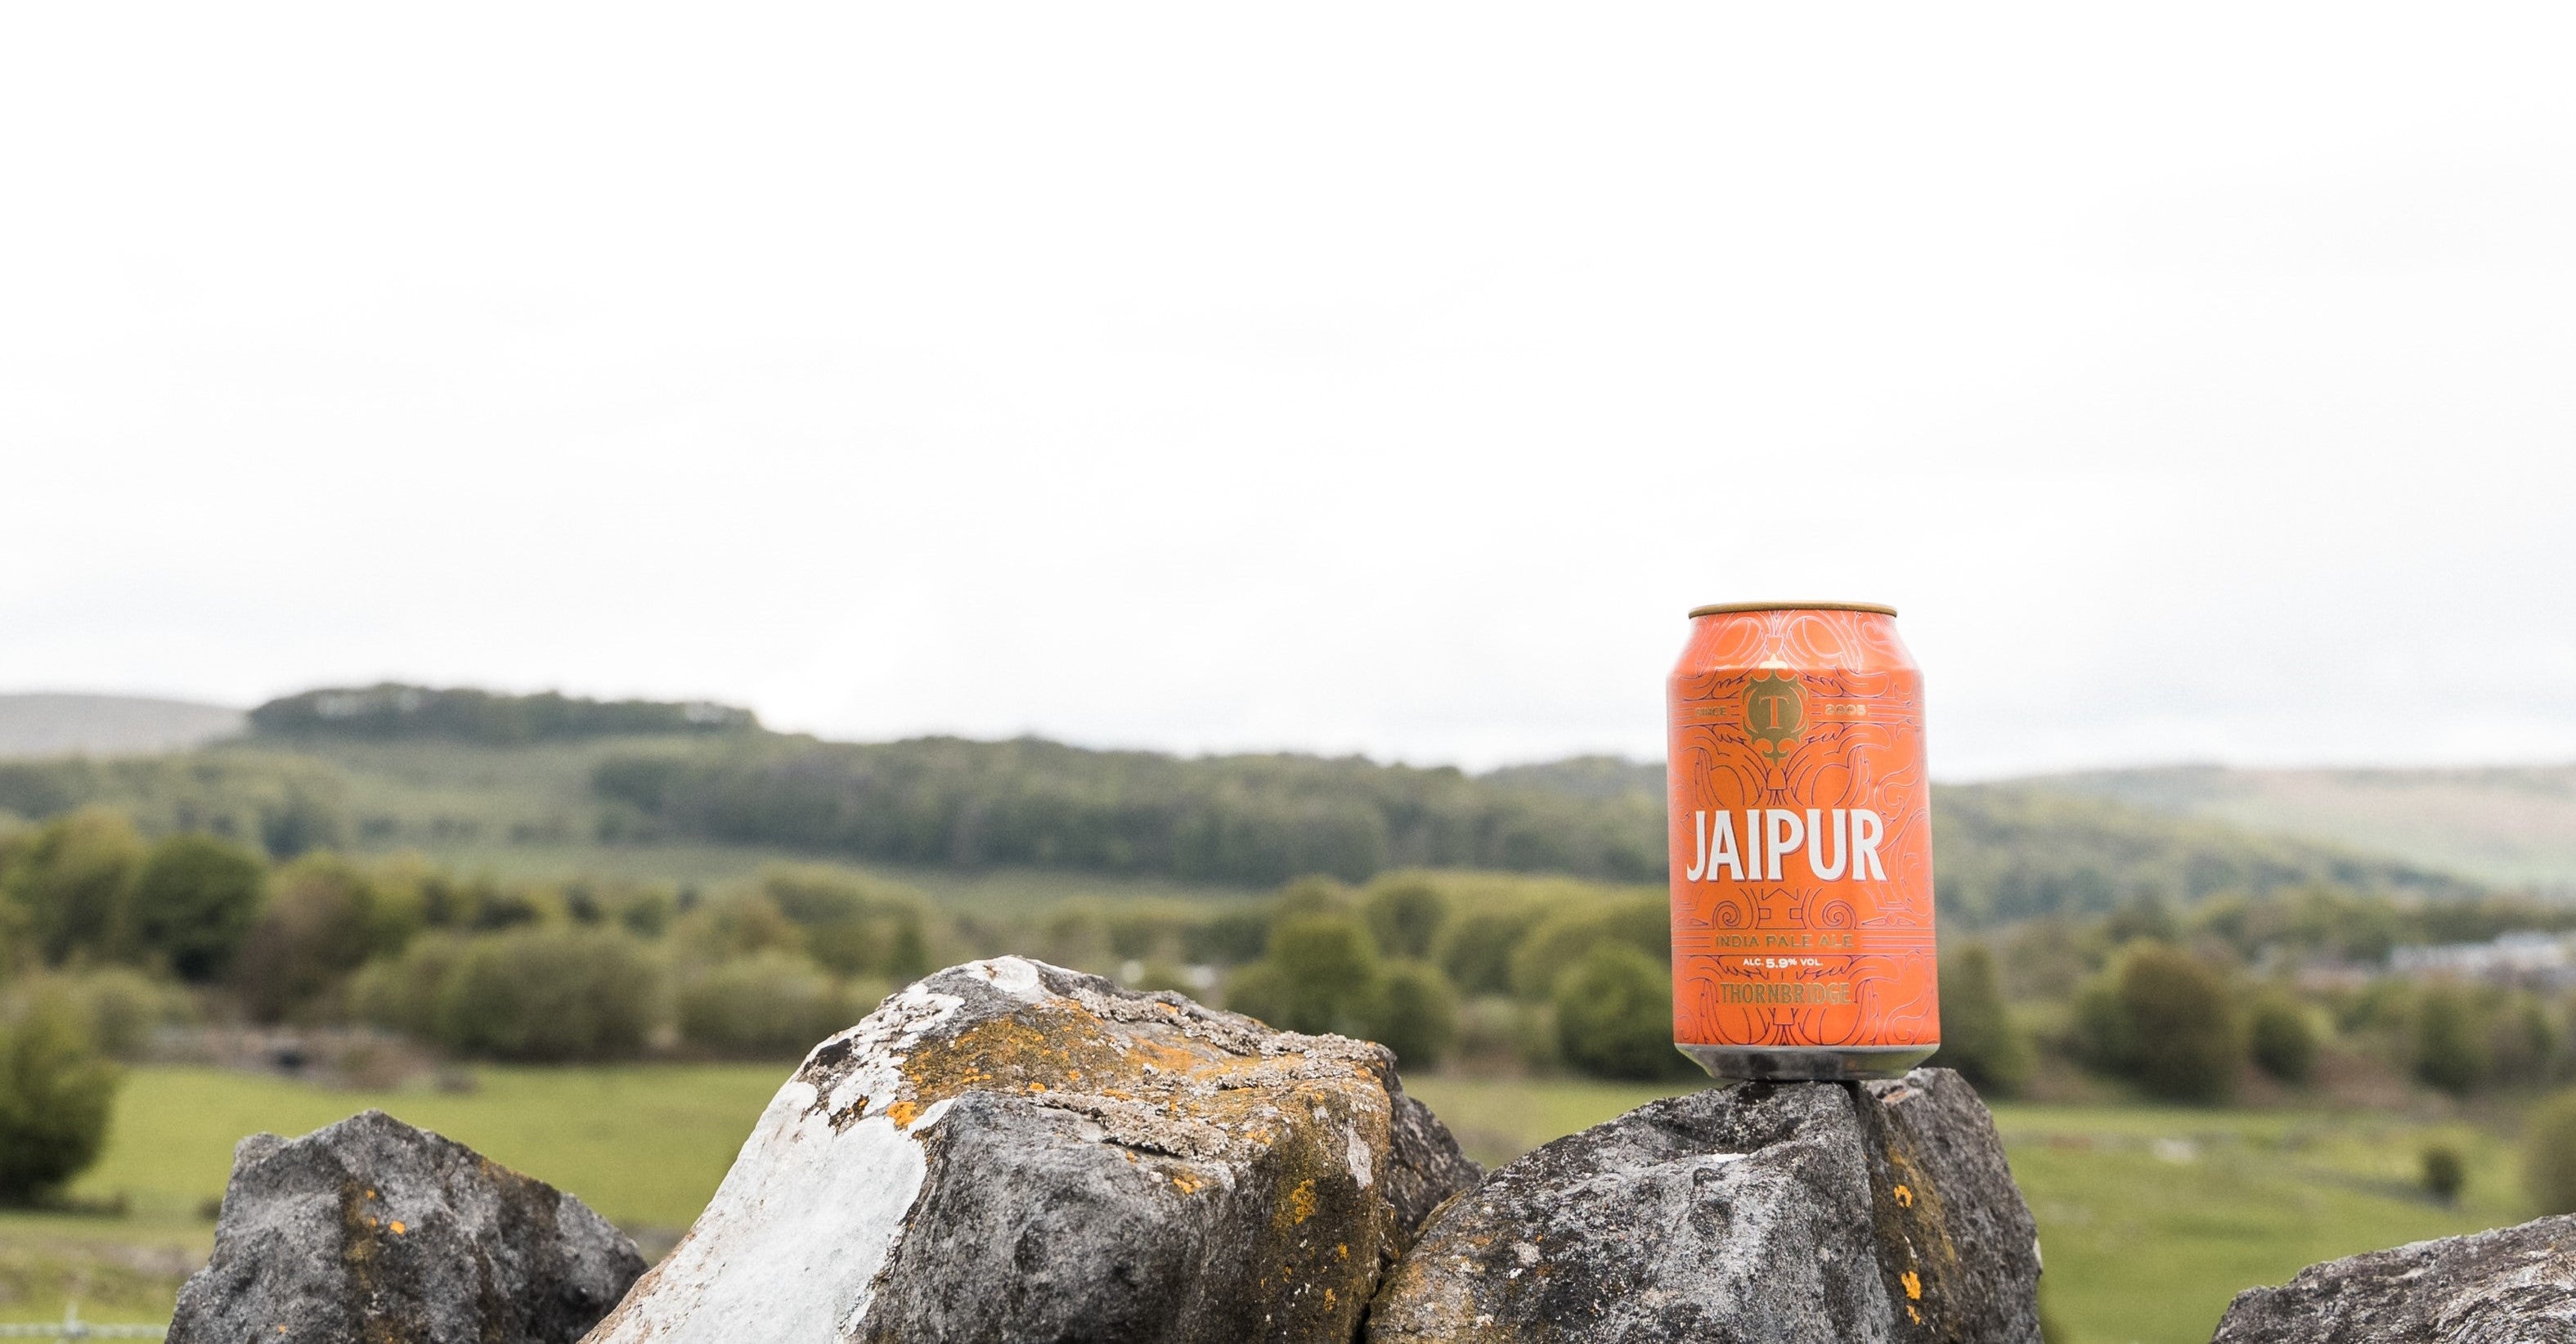 can of jaipur sat on a dry stone wall in the peak district national park